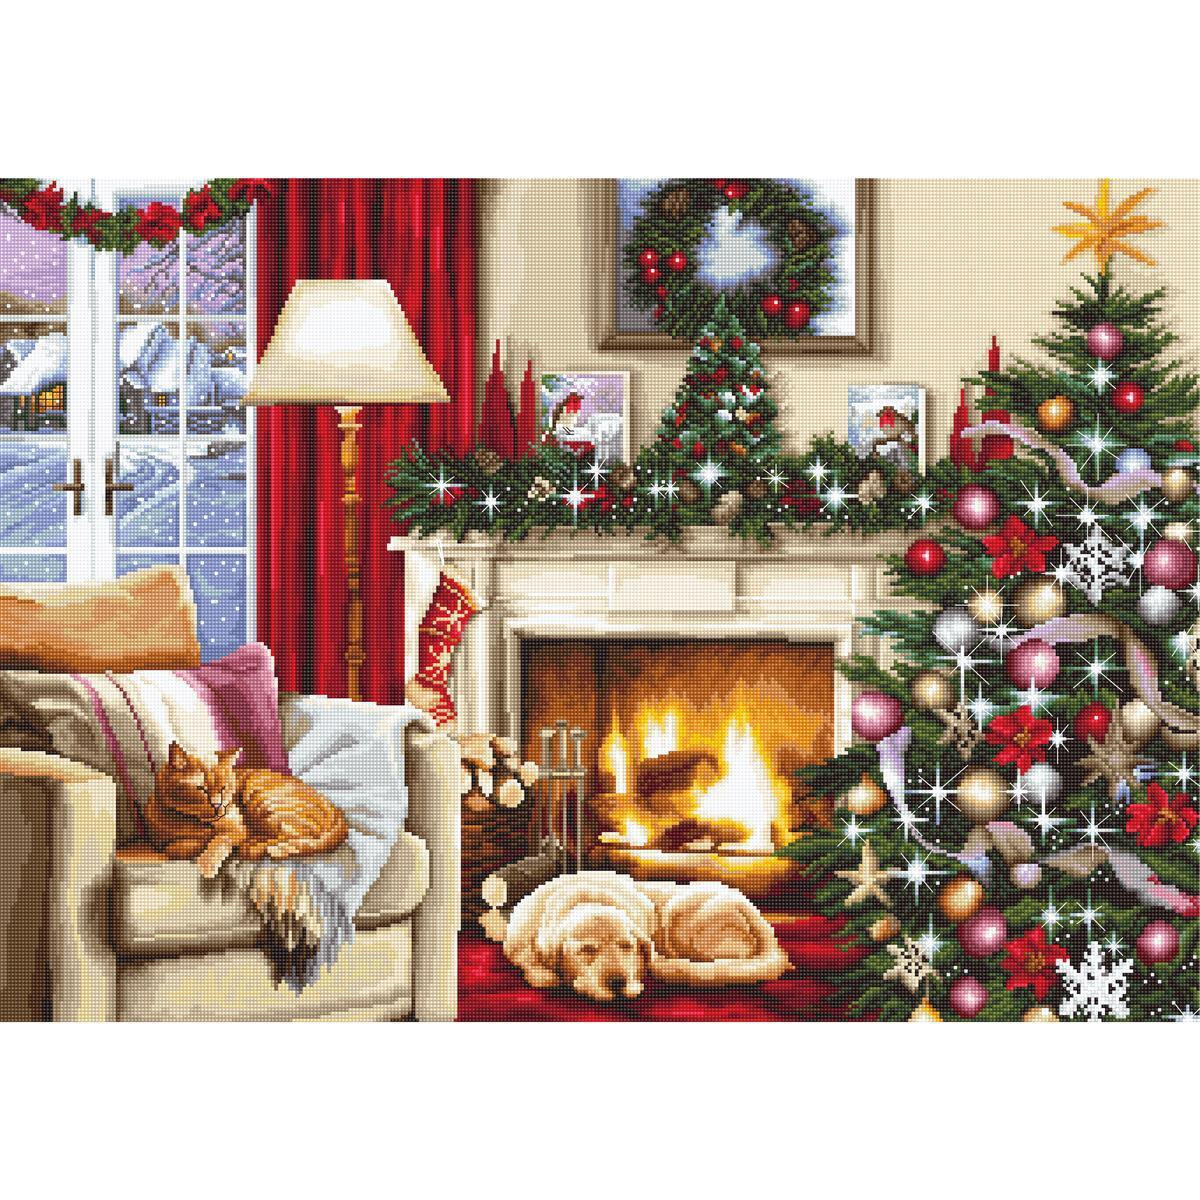 Luca-s counted cross stitch kit "Christmas...